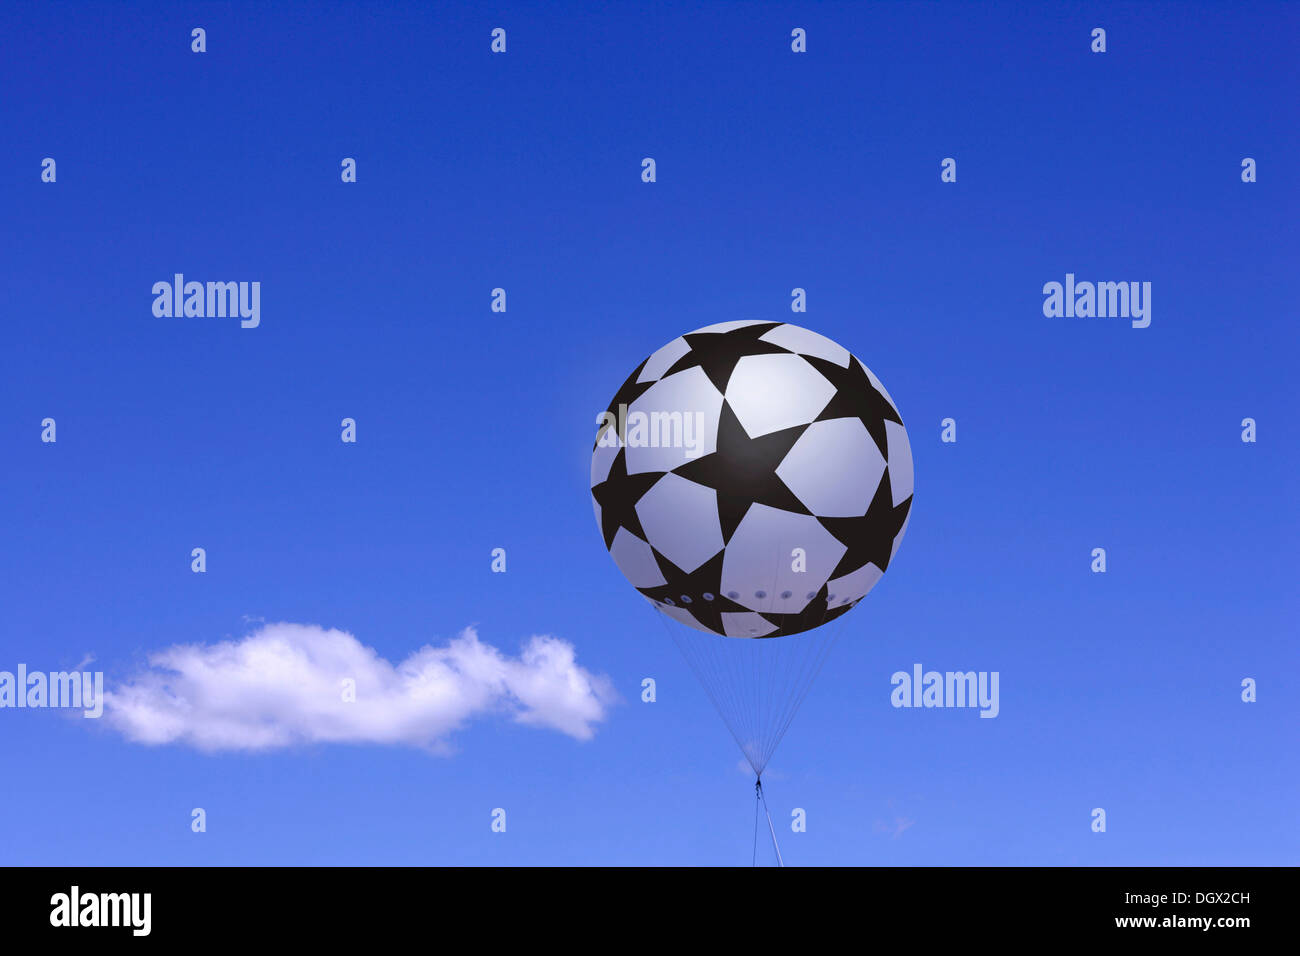 Tethered balloon with the Champions League logo against a blue sky with a cloud, Bavaria, Germany Stock Photo